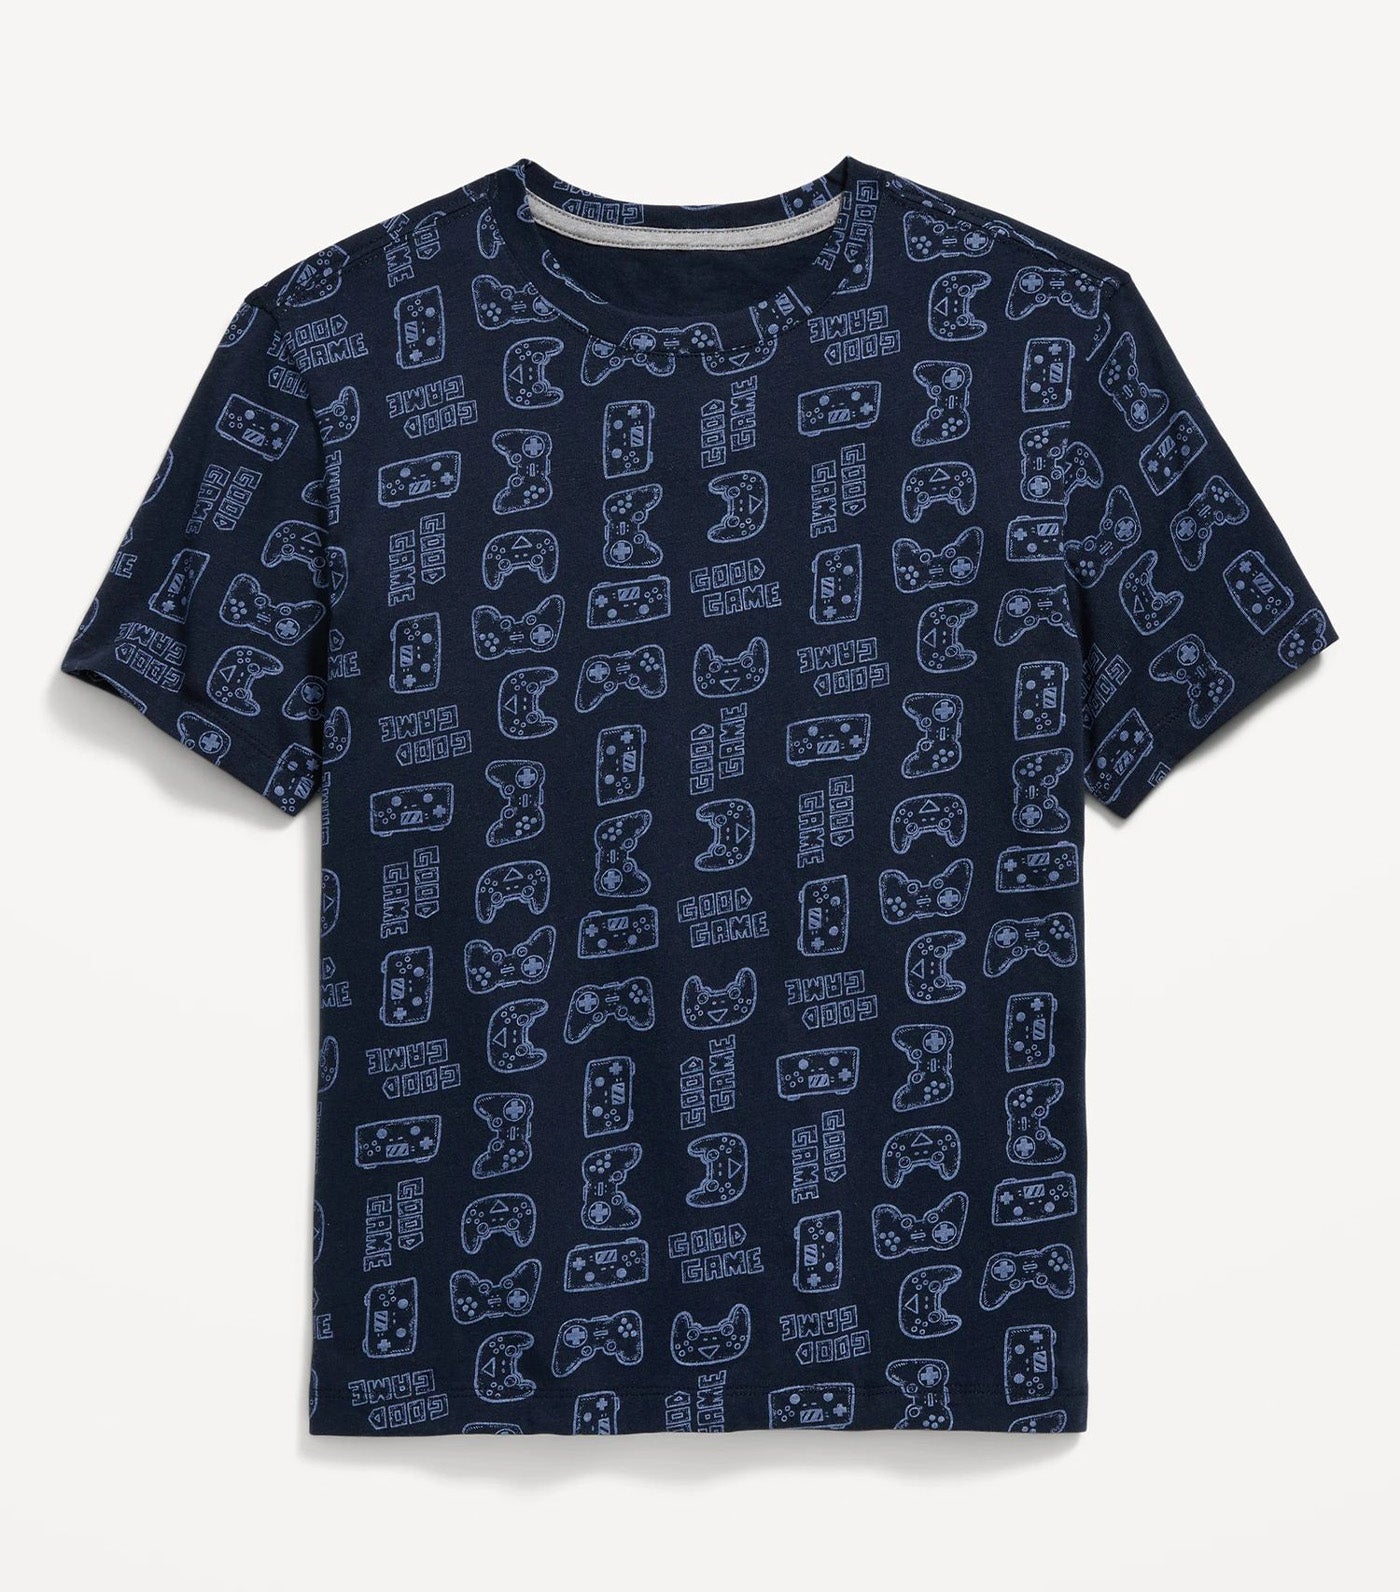 Softest Printed Crew-Neck T-Shirt for Boys - X Games